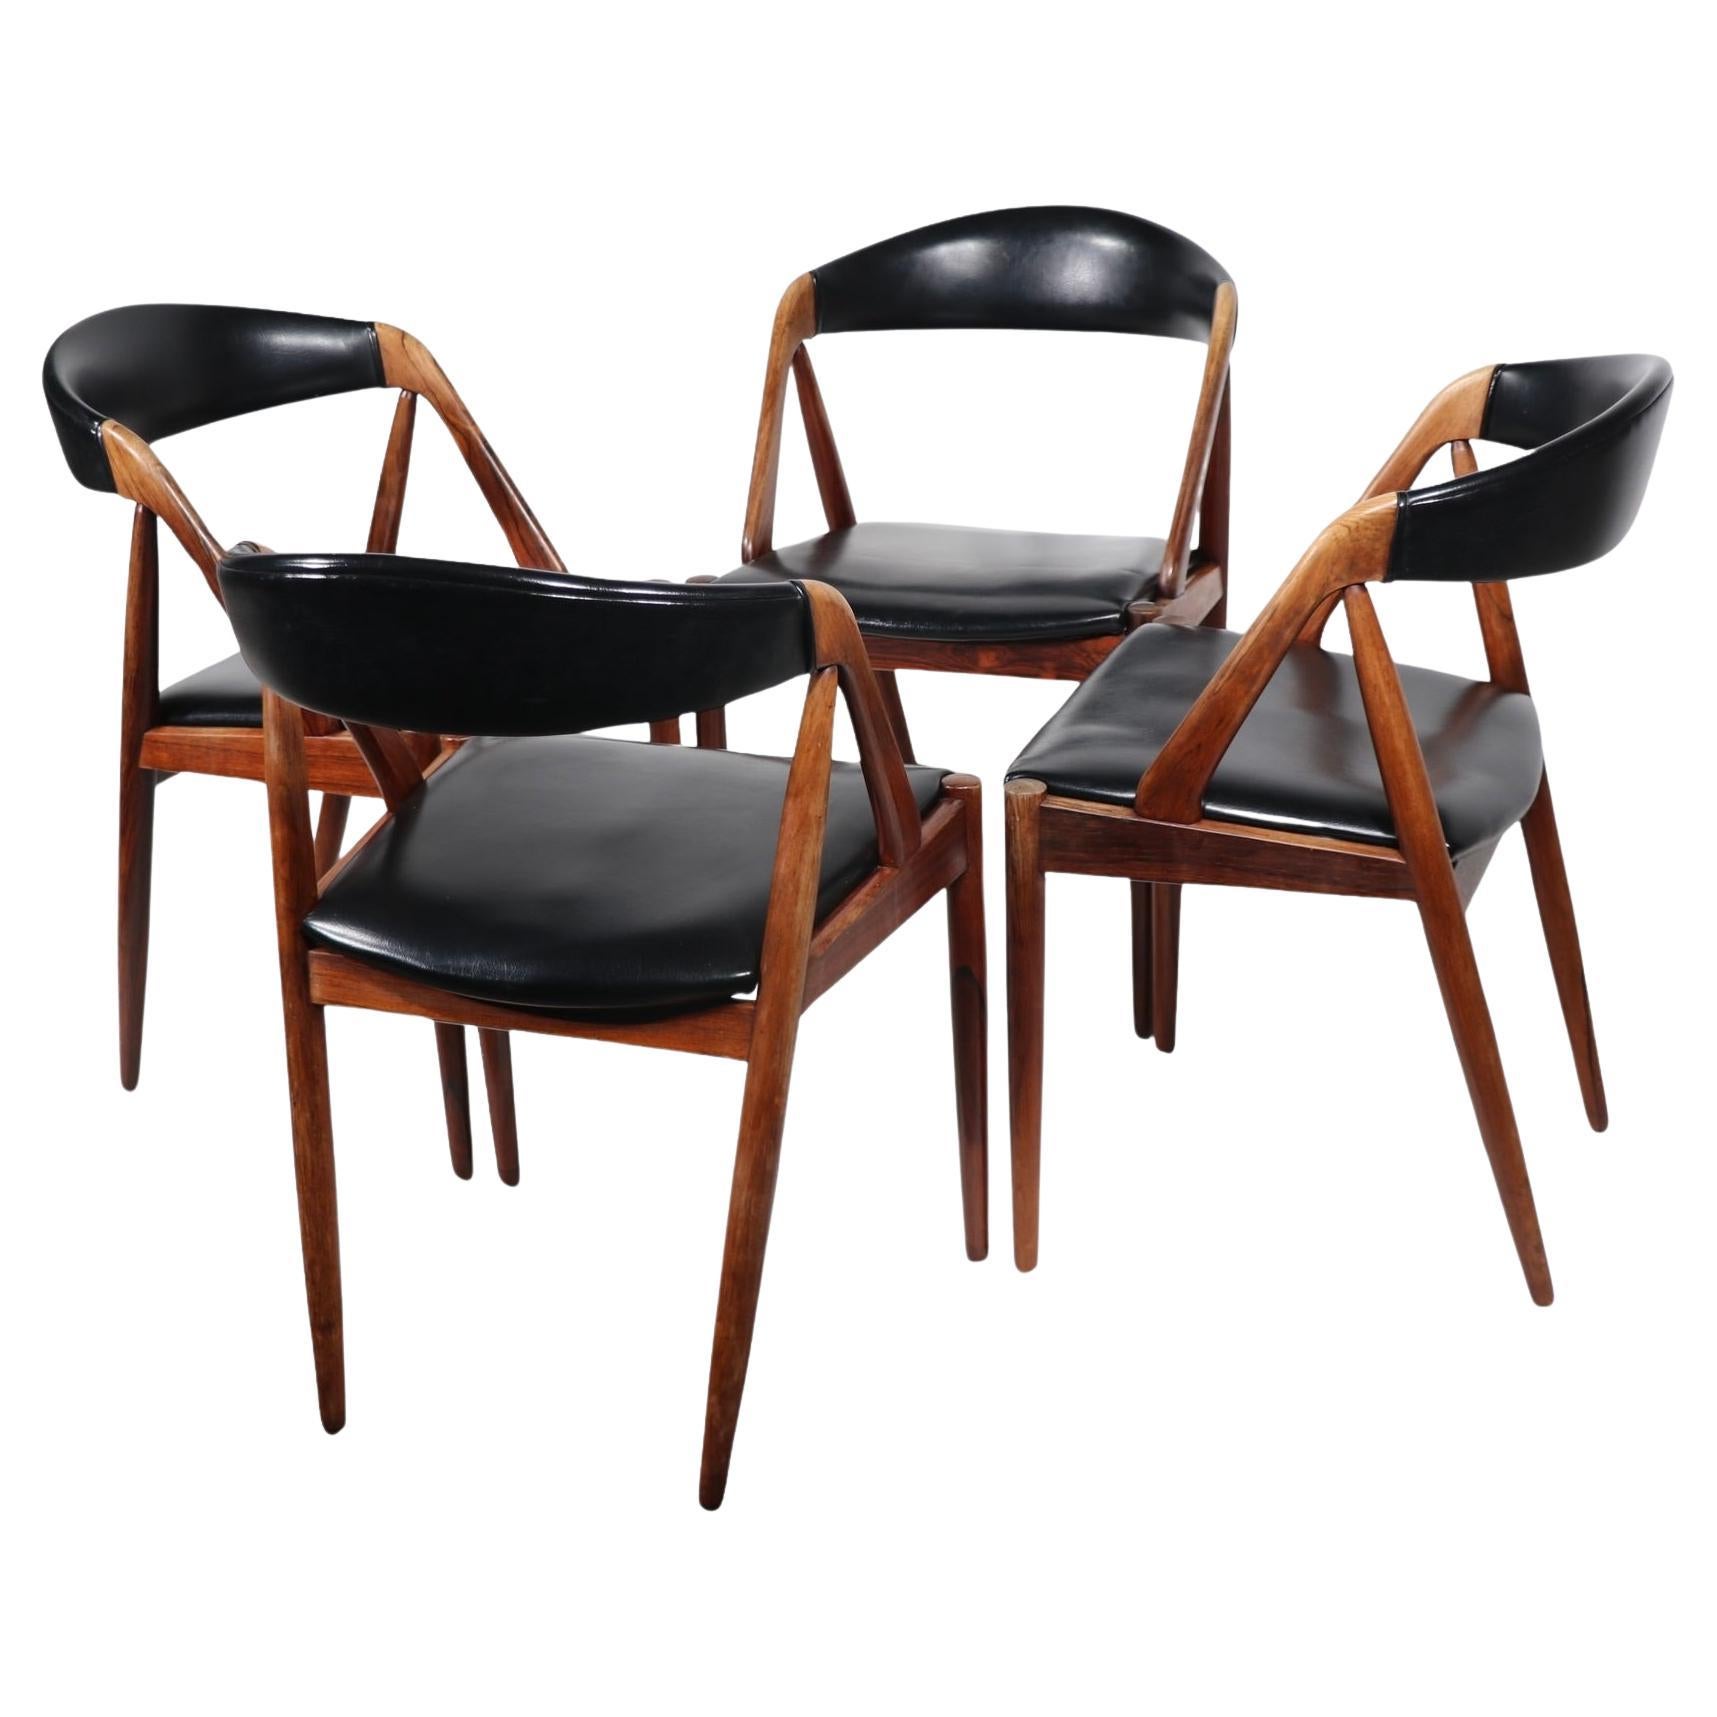  4 Rosewood Model 31 Danish Mid Century Modern Dining Chairs by Kai Kristiansen  For Sale